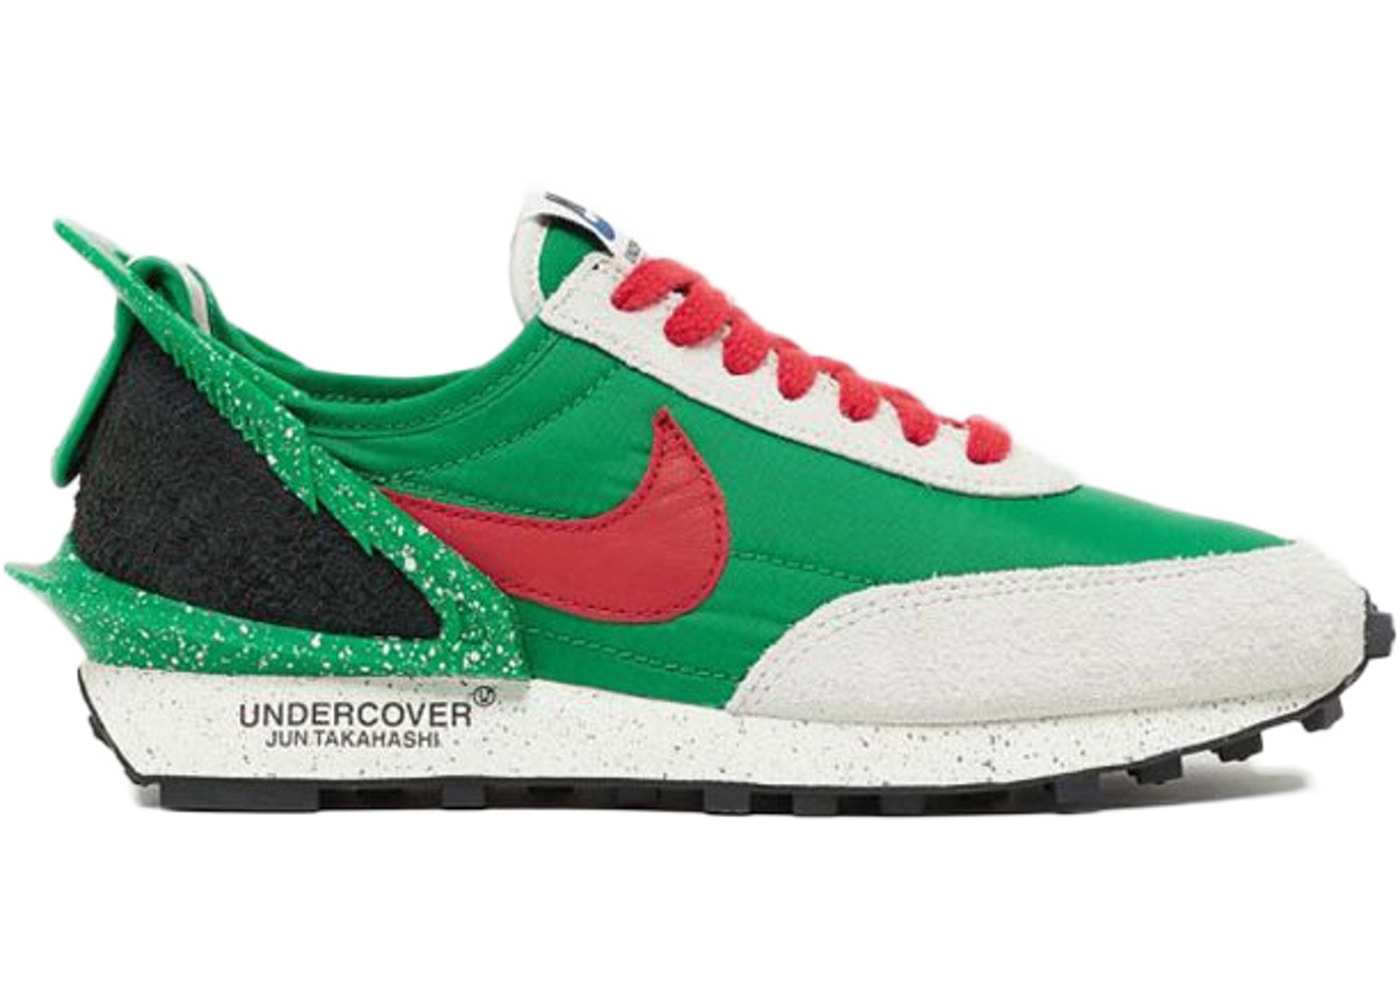 green and red nike shoes